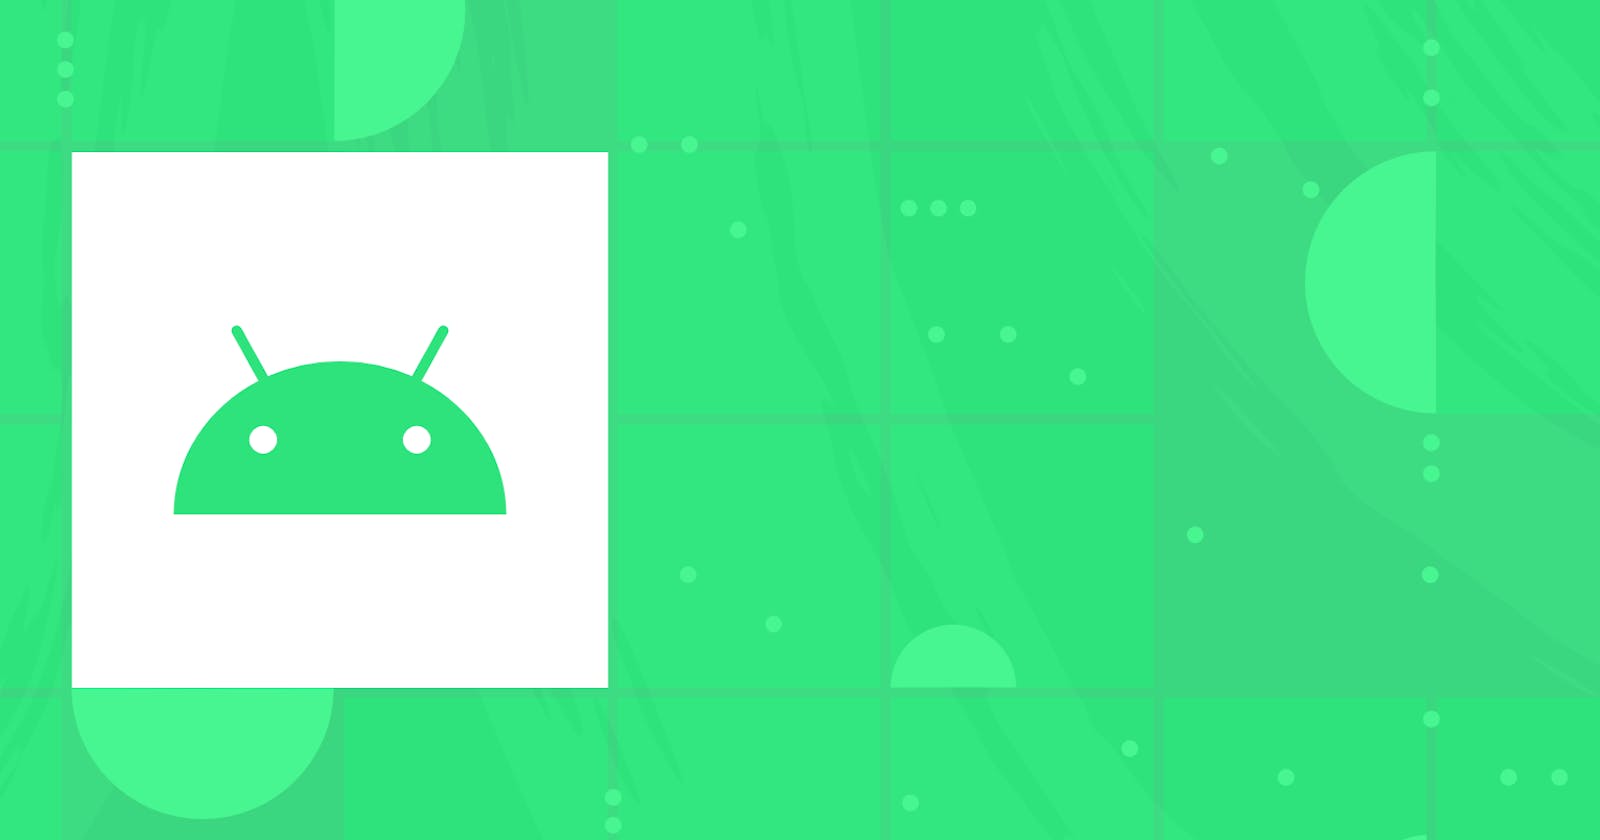 Continuous Integration & Deployment for Android apps